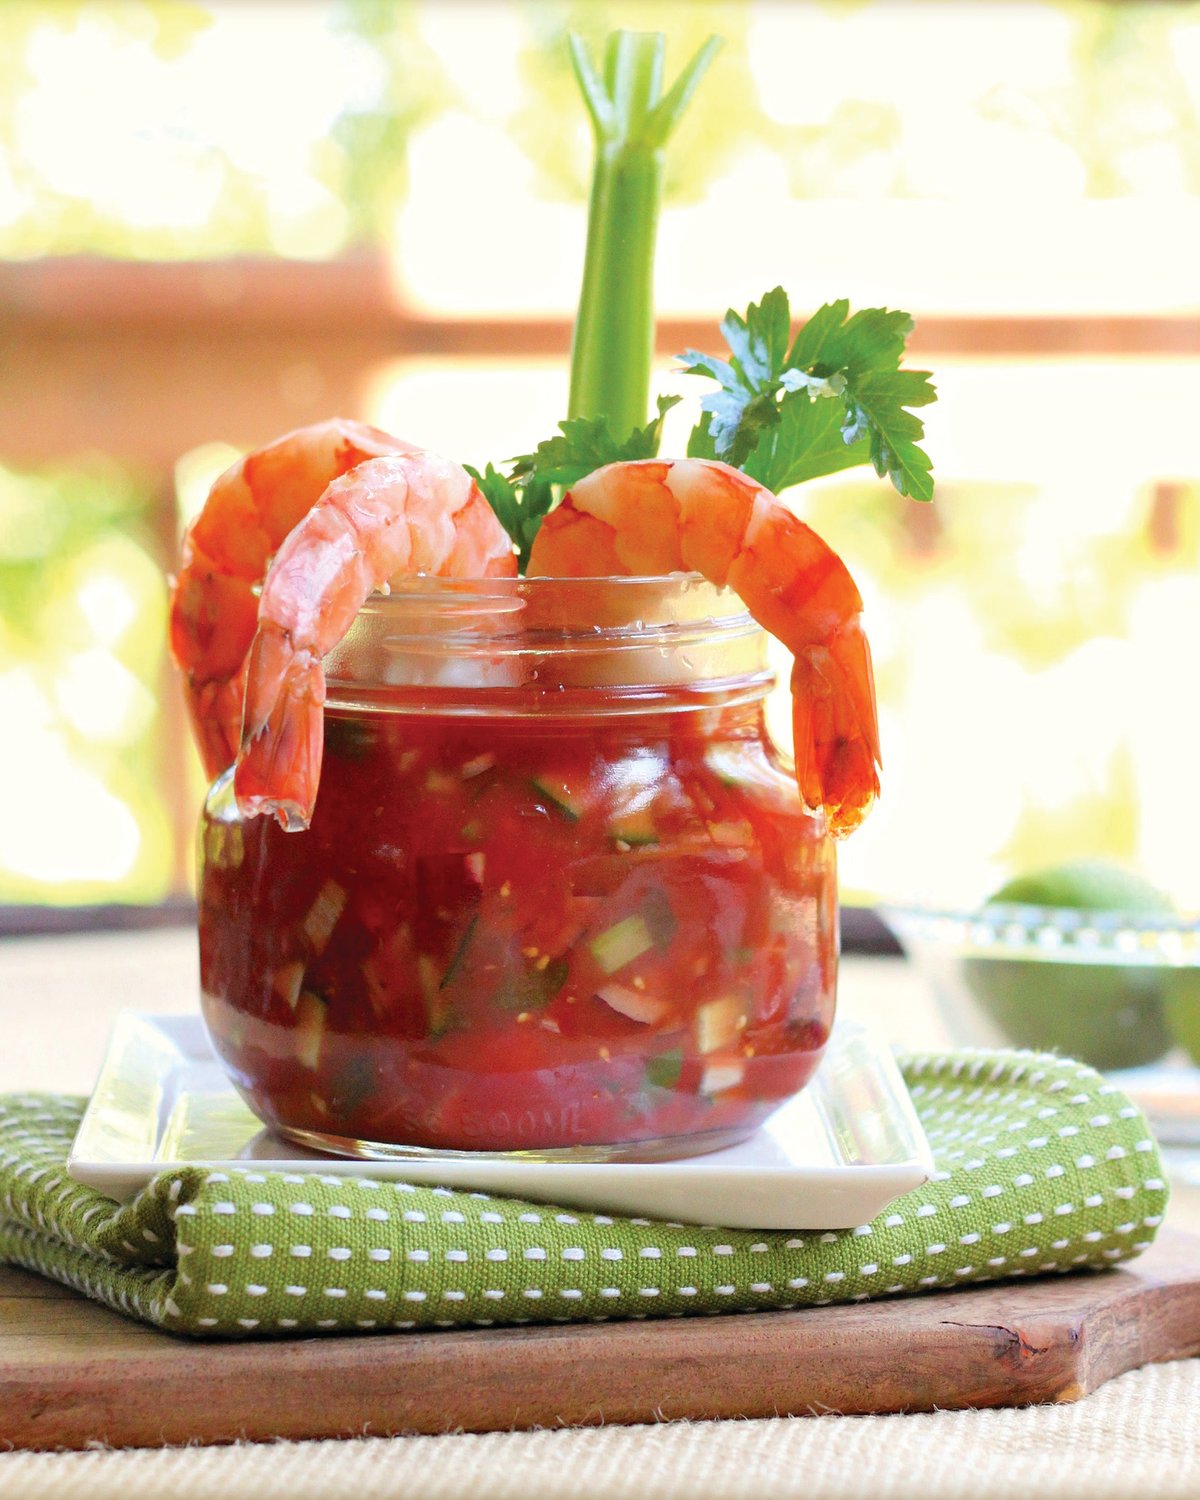 This gazpacho takes inspiration from a shrimp cocktail, with the tomato juice base infused with cocktail sauce ingredients, such as horseradish, lemon and Worcestershire sauce.